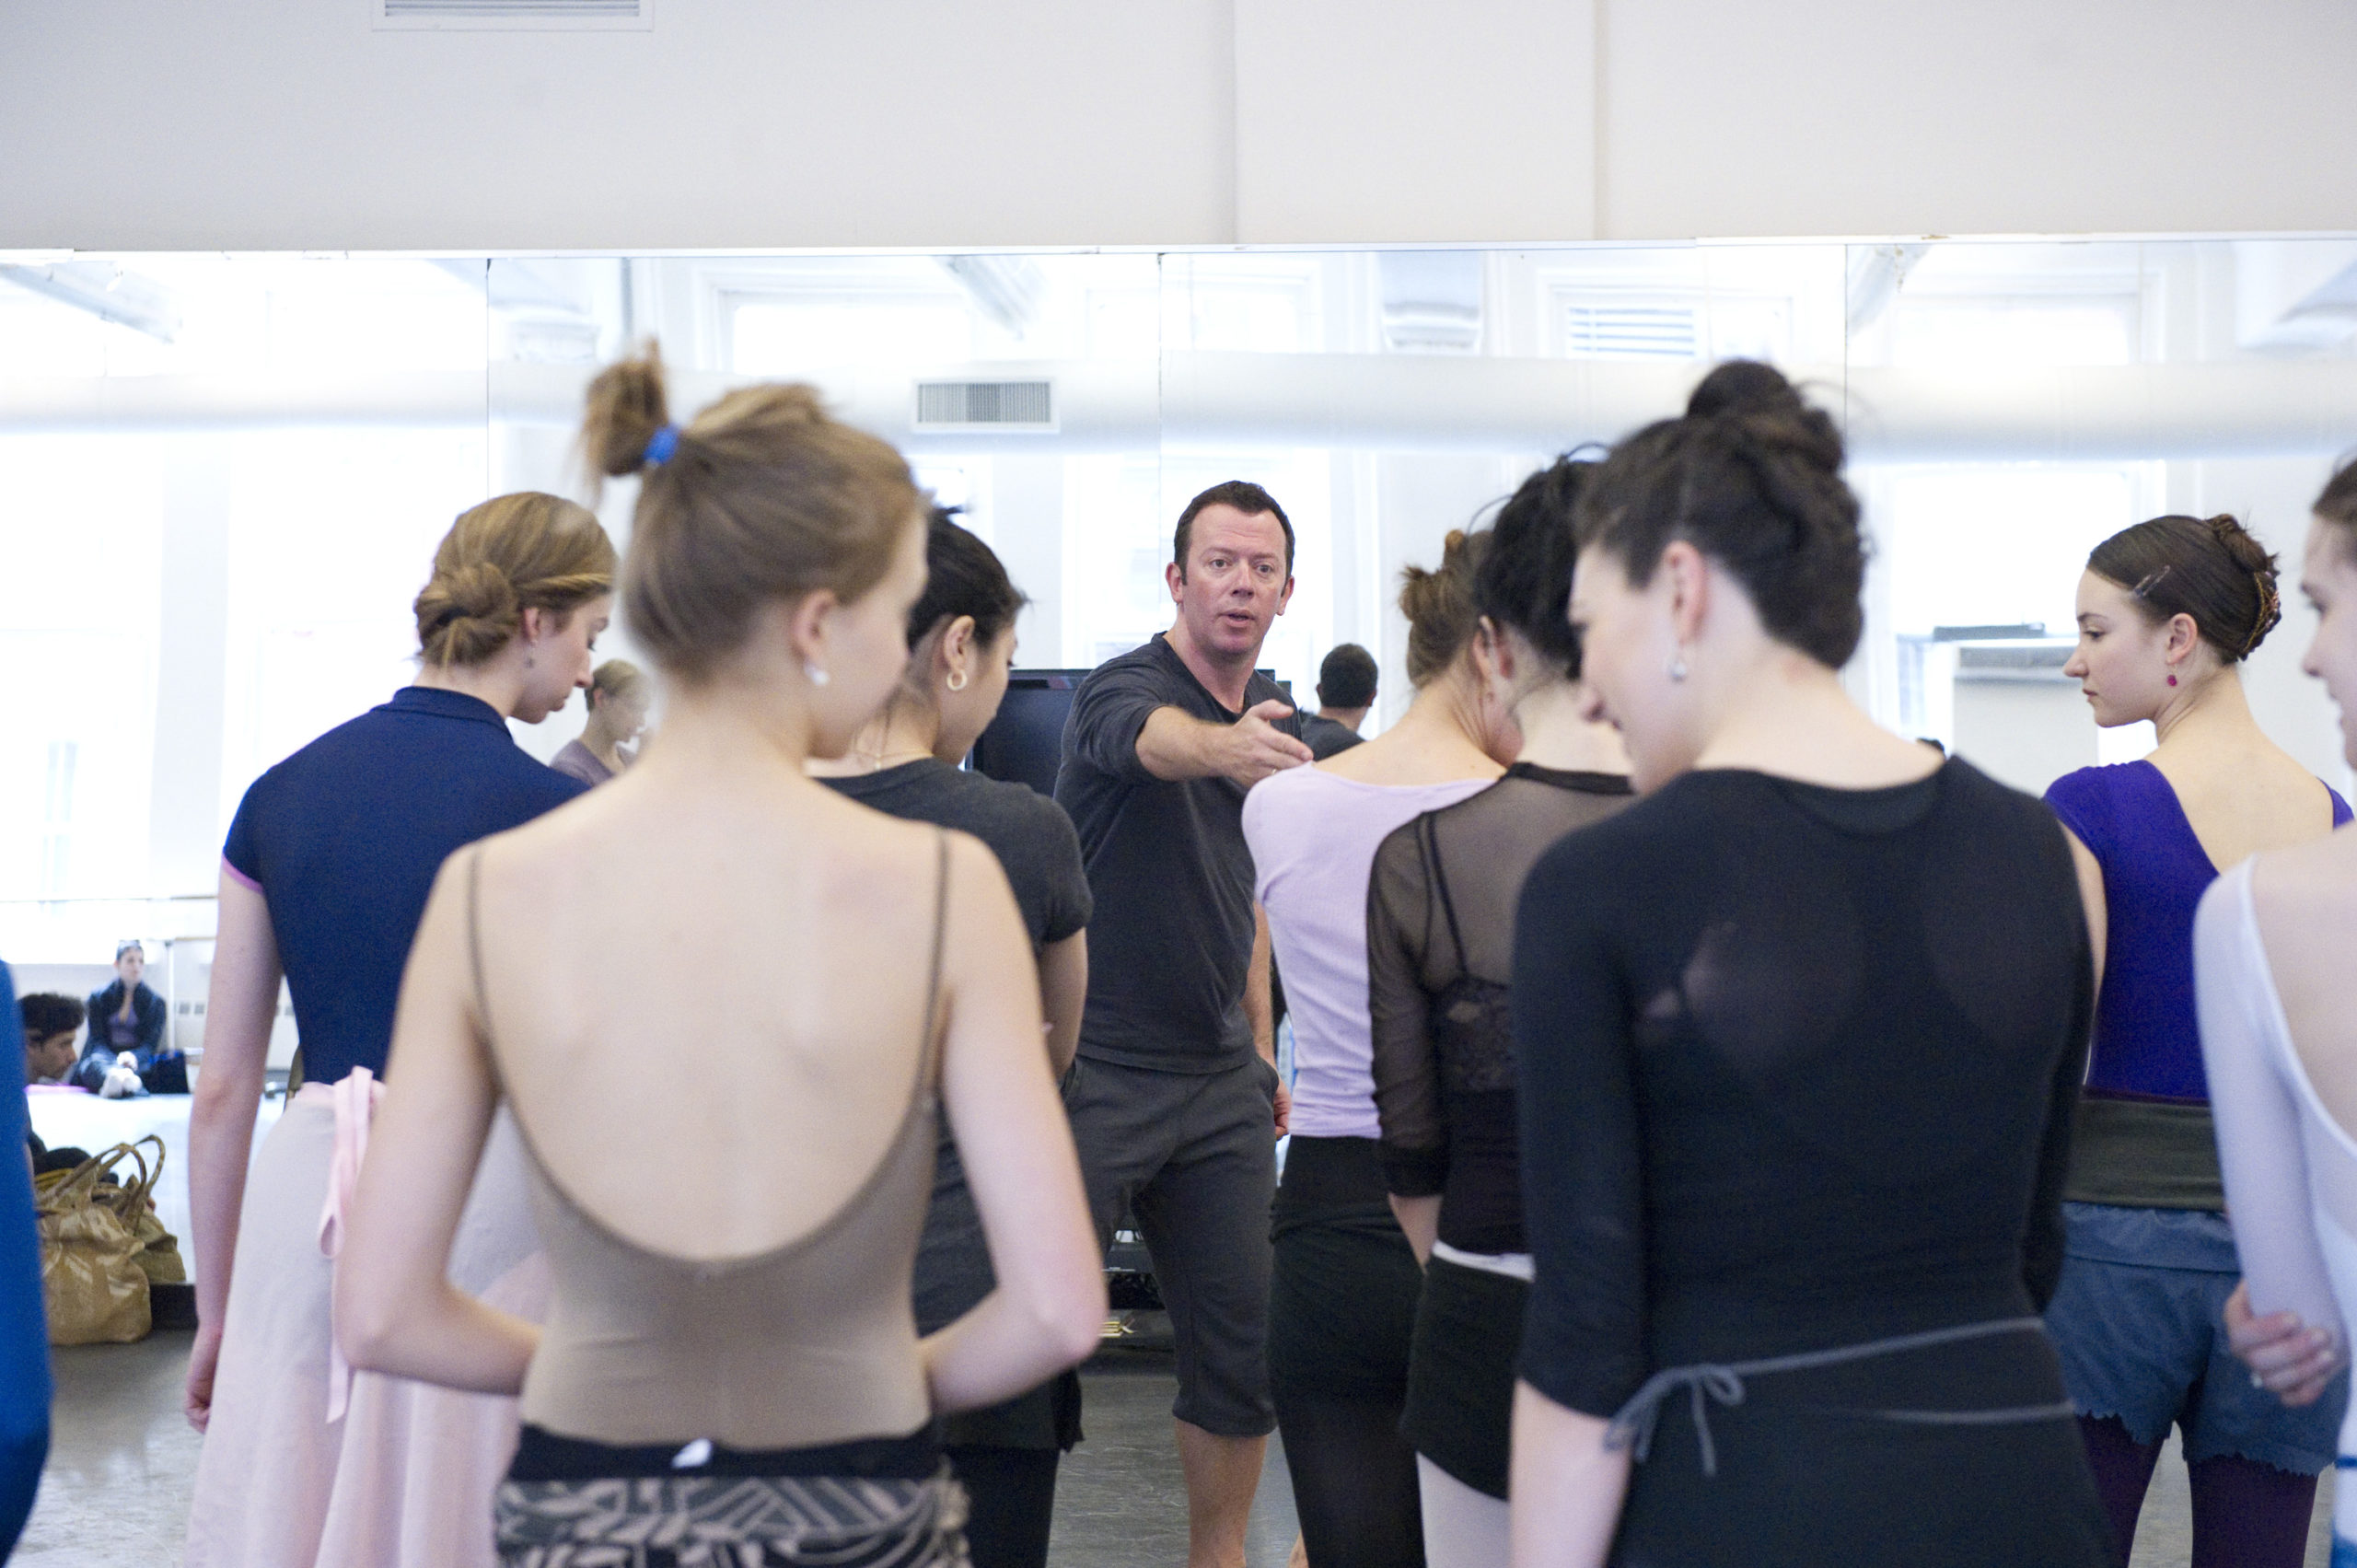 In a brightly lit studio, Alexei Ratmansky stands in front of a mirror, motioning with his hand and speaking to the crowd of female and male dancers in front of him. They wear various shades and styles of dancewear and athletic clothing.